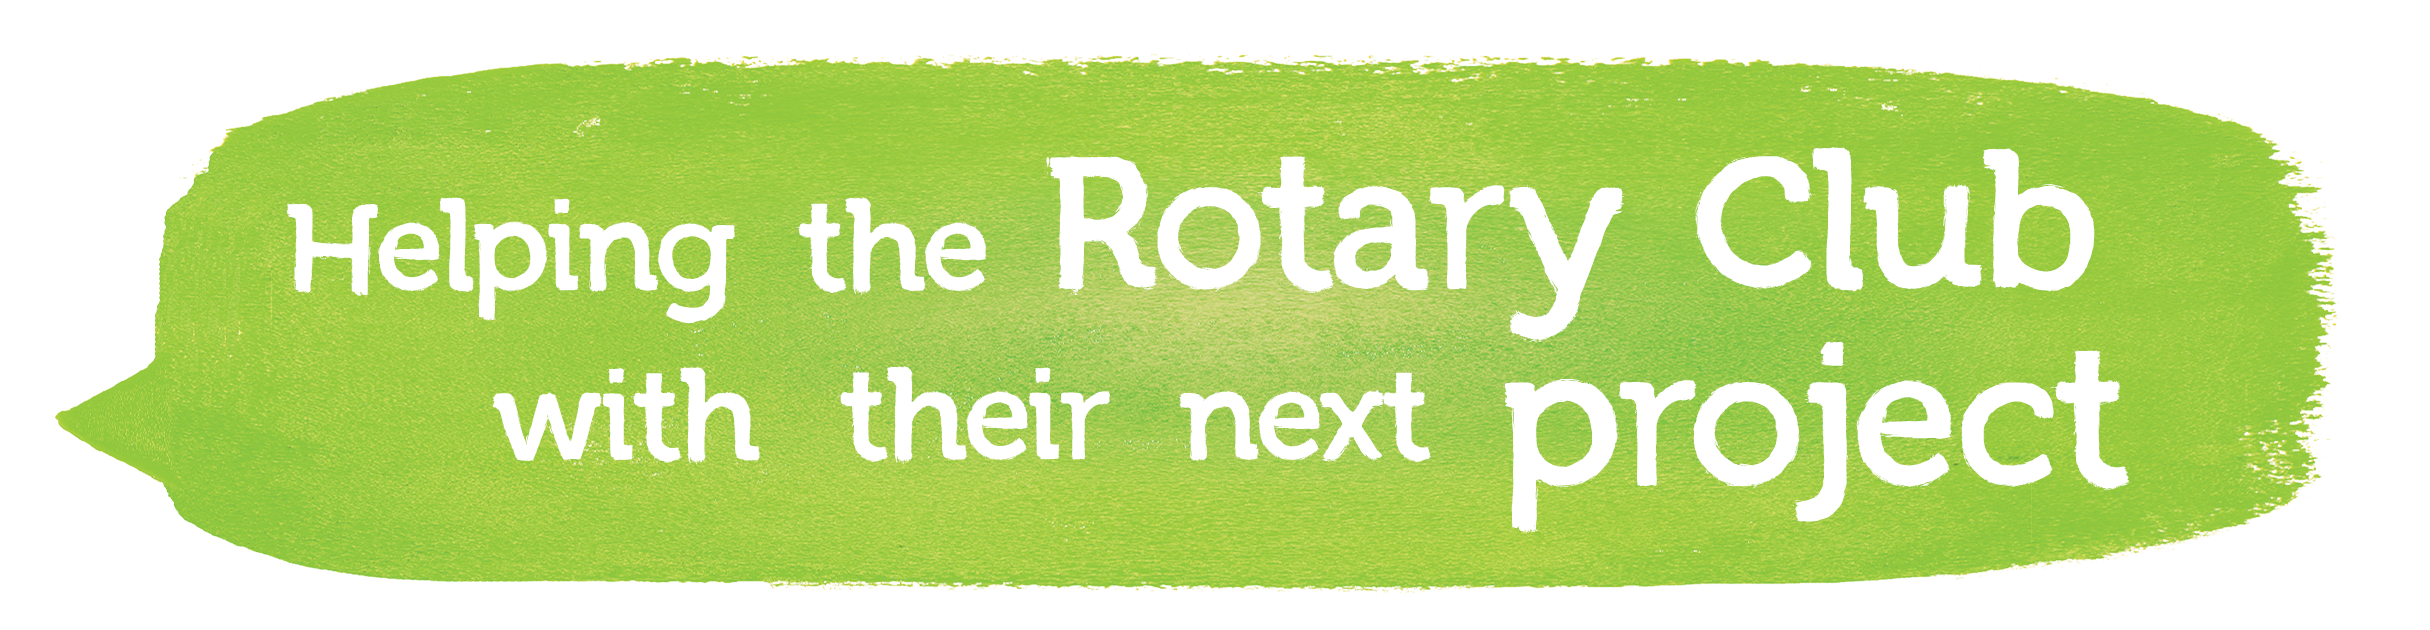 Helping the Rotary Club with their next project